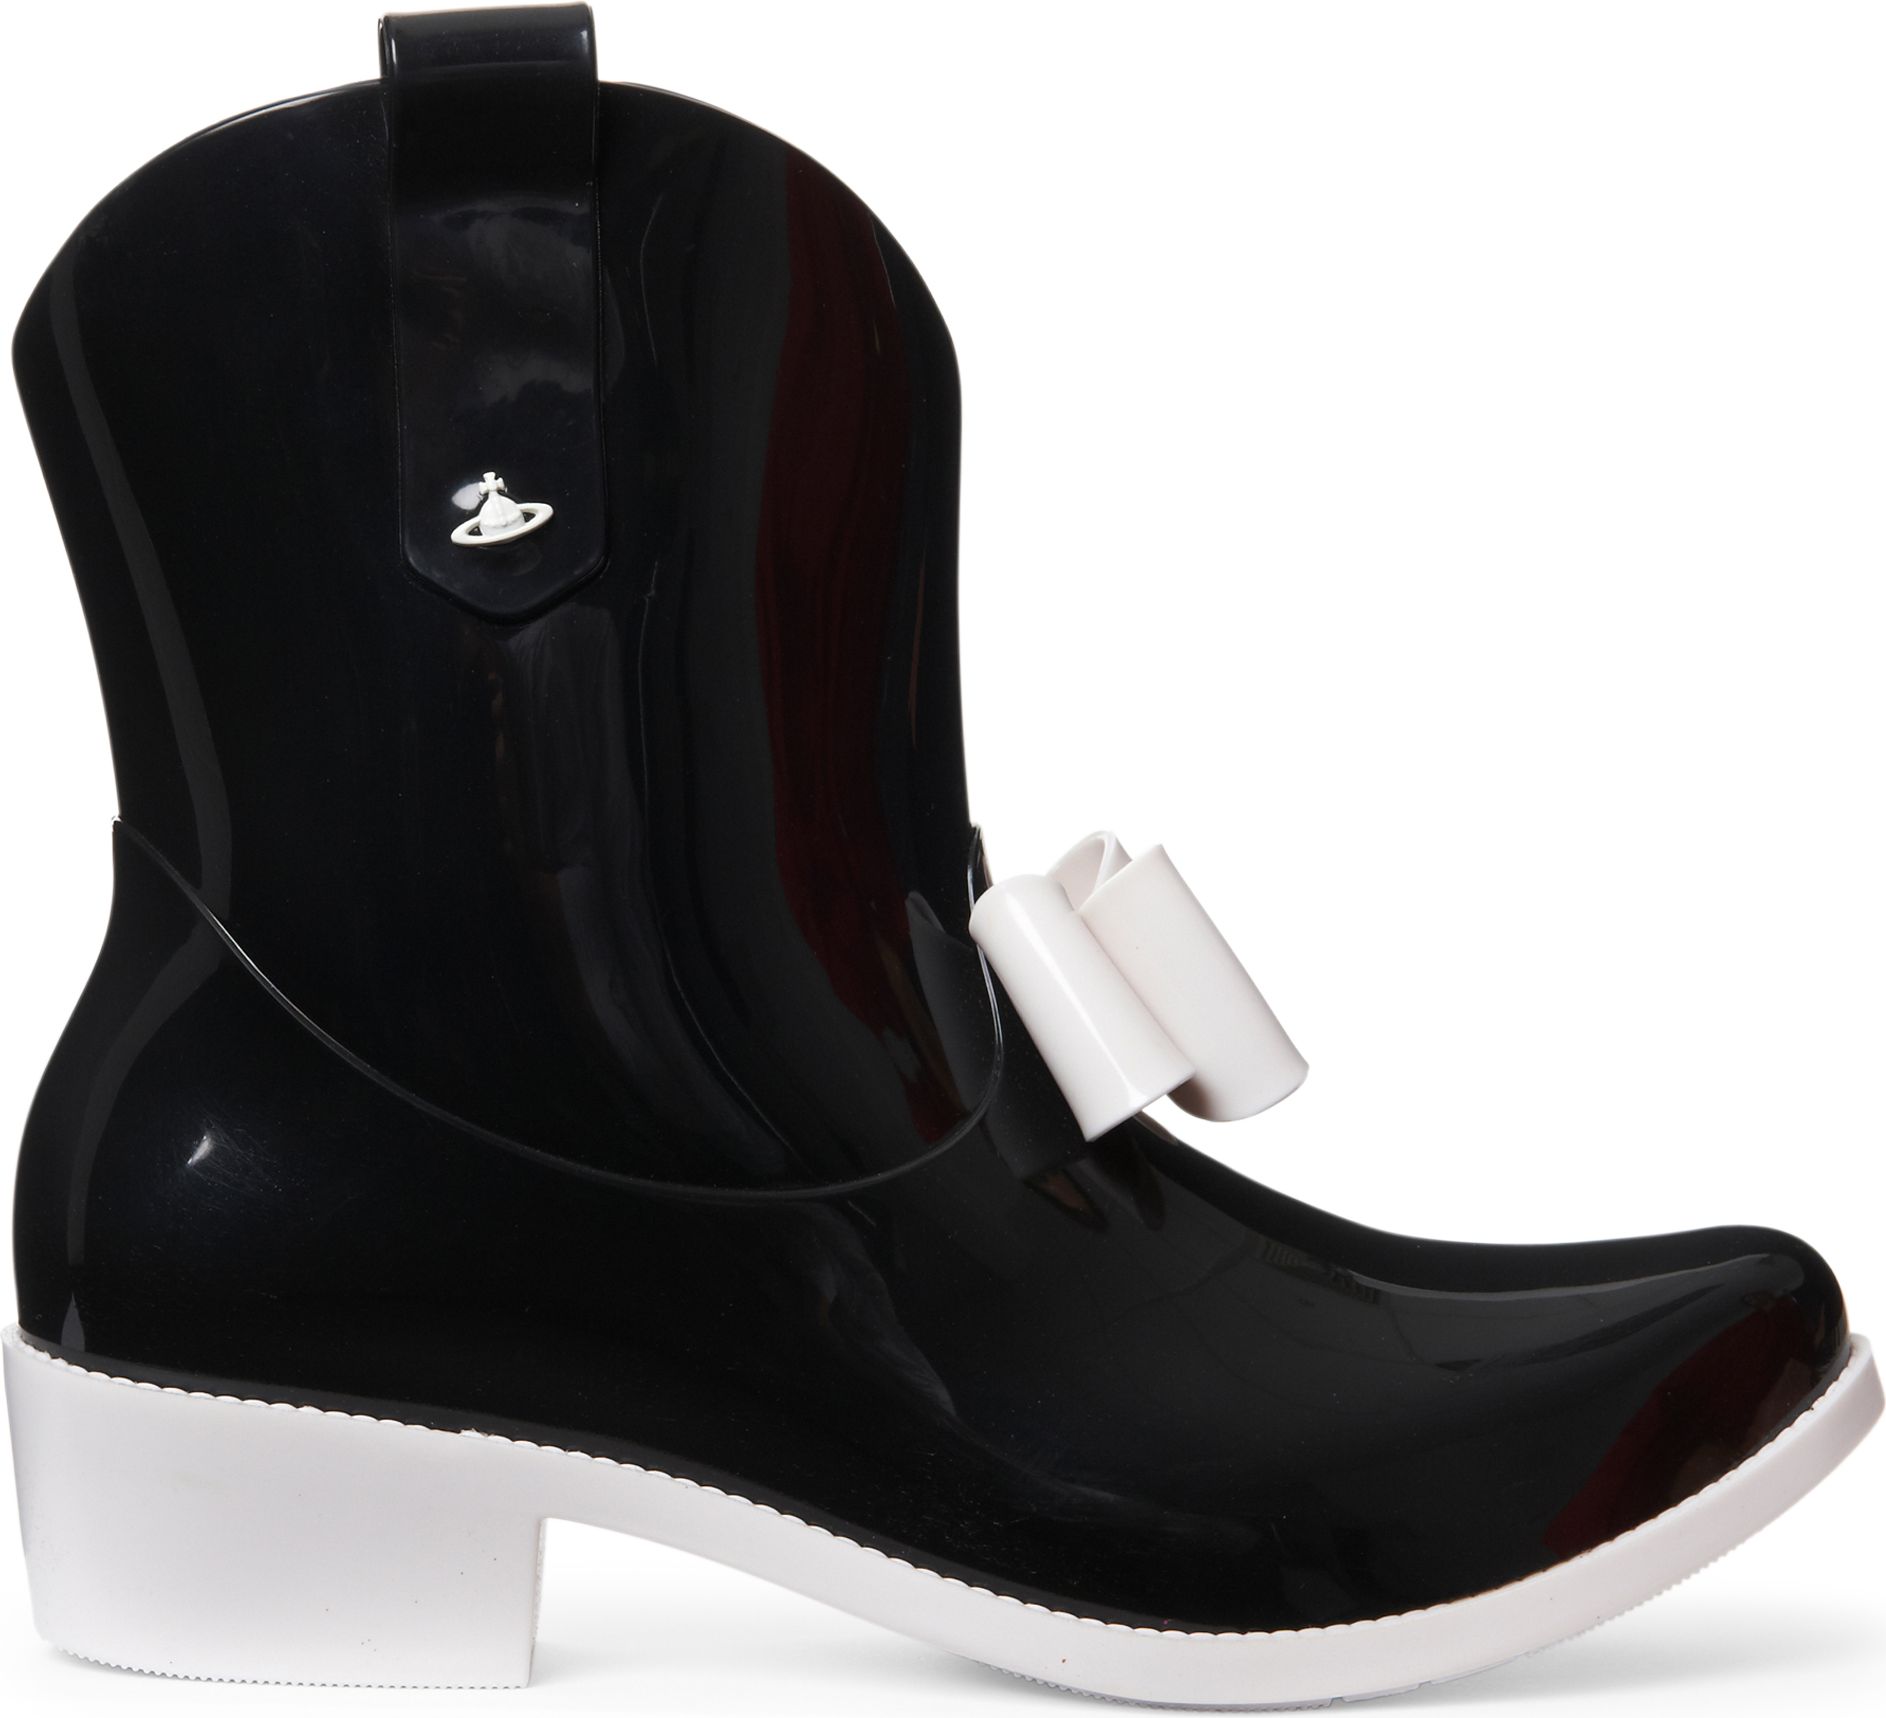 Melissa + Vivienne Westwood Anglomania Protection Jelly Cowboy Boots in ...